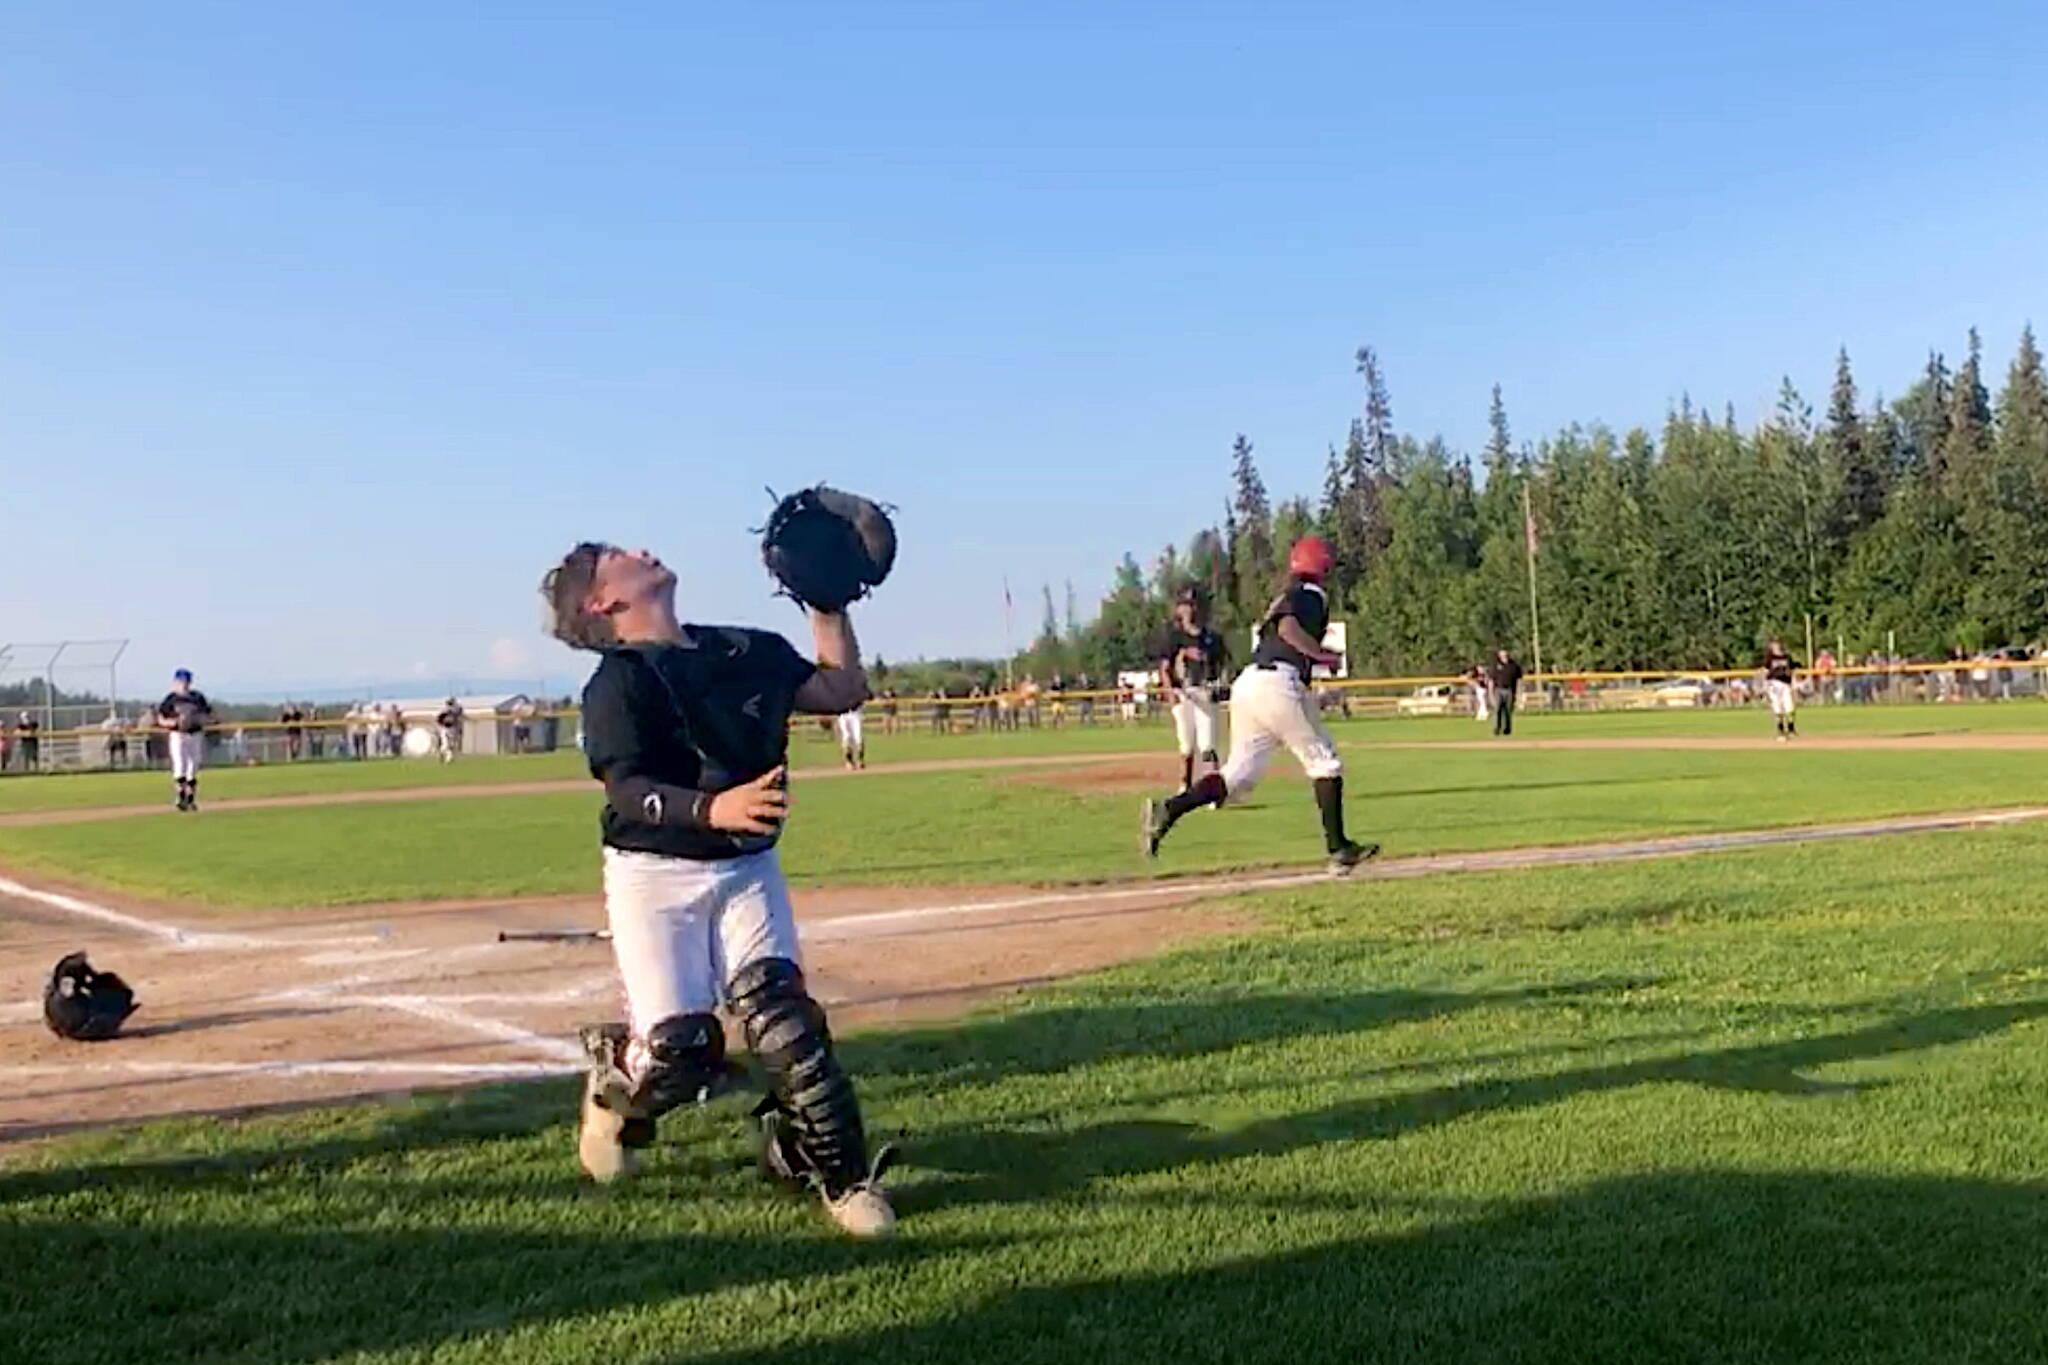 Juneau catcher Isaac Kirsch looks to catch a pop-up foul against Dimond West in the deciding fifth game of the Alaska Little League Majors Baseball State Tournament in Anchorage. (Screenshot from Gastineau Channel Little League video of game)